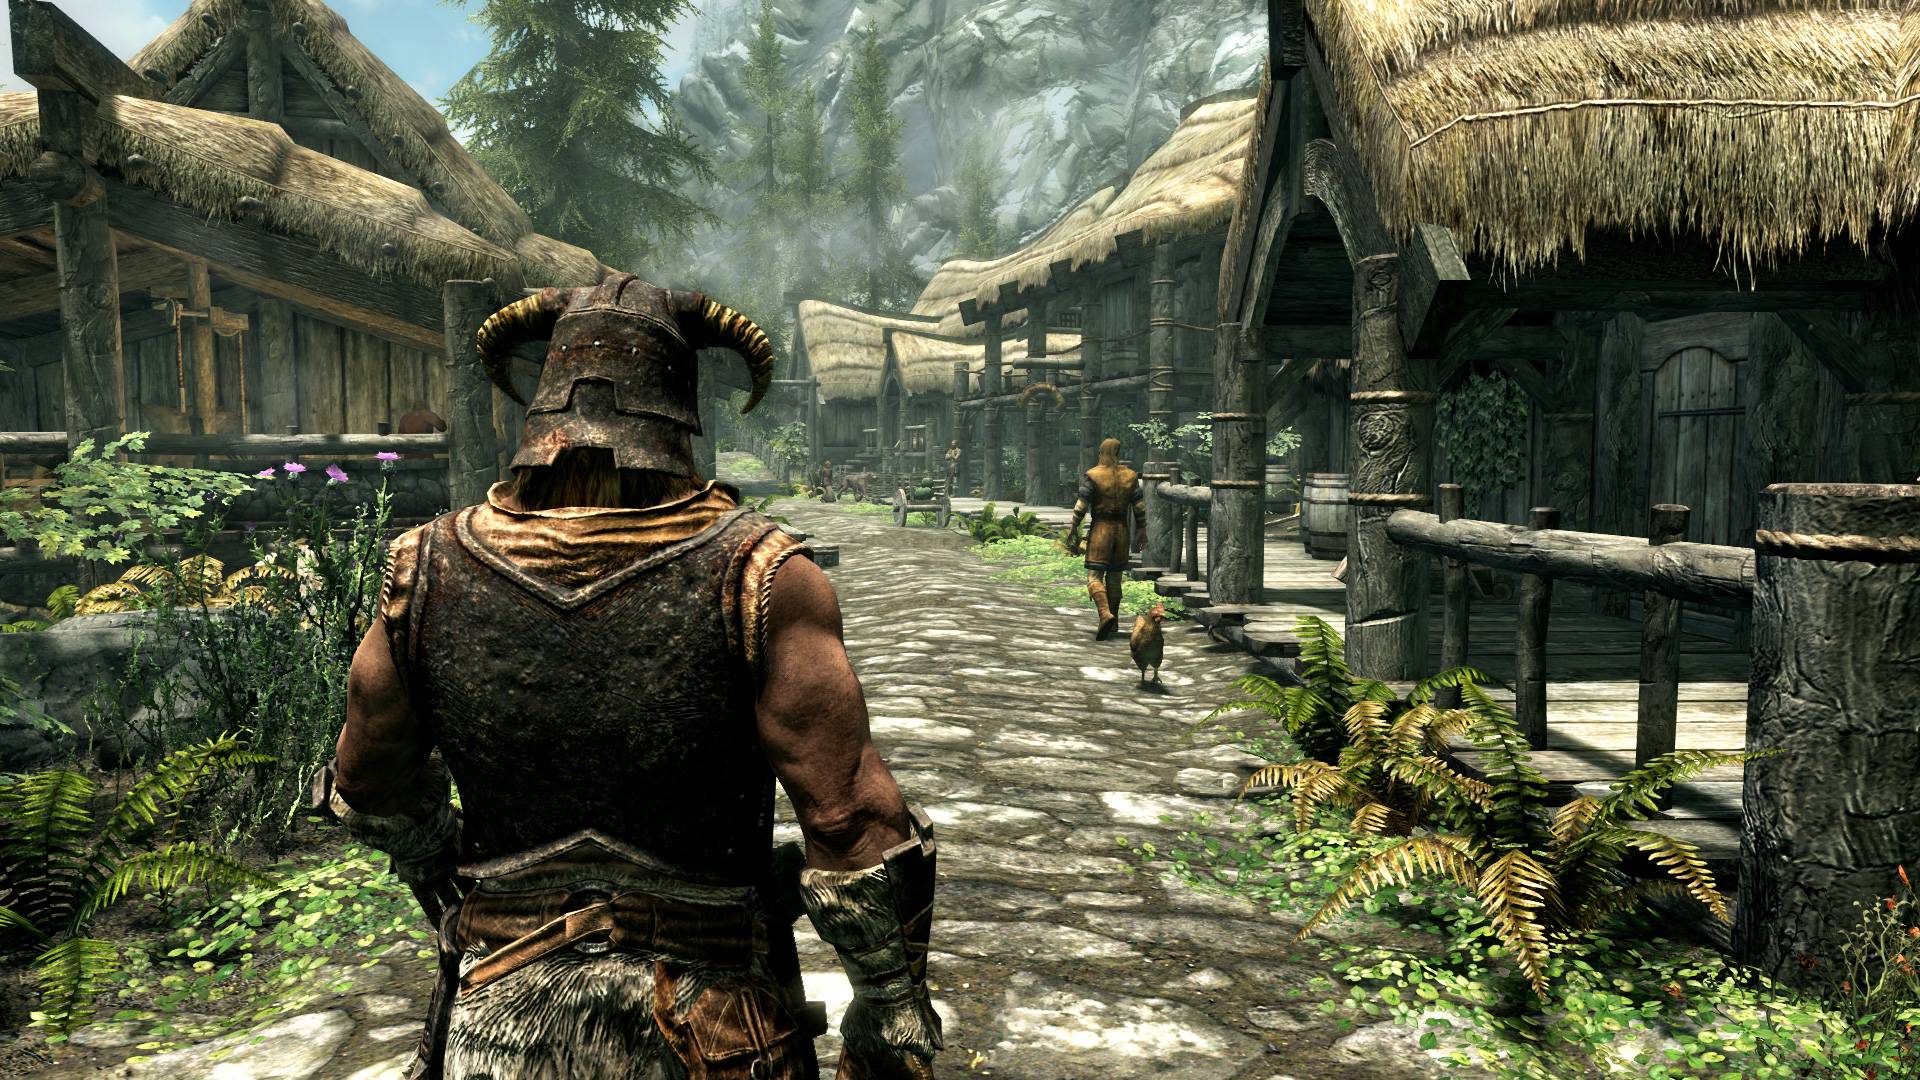 5 of the Best RPG Games of All Time